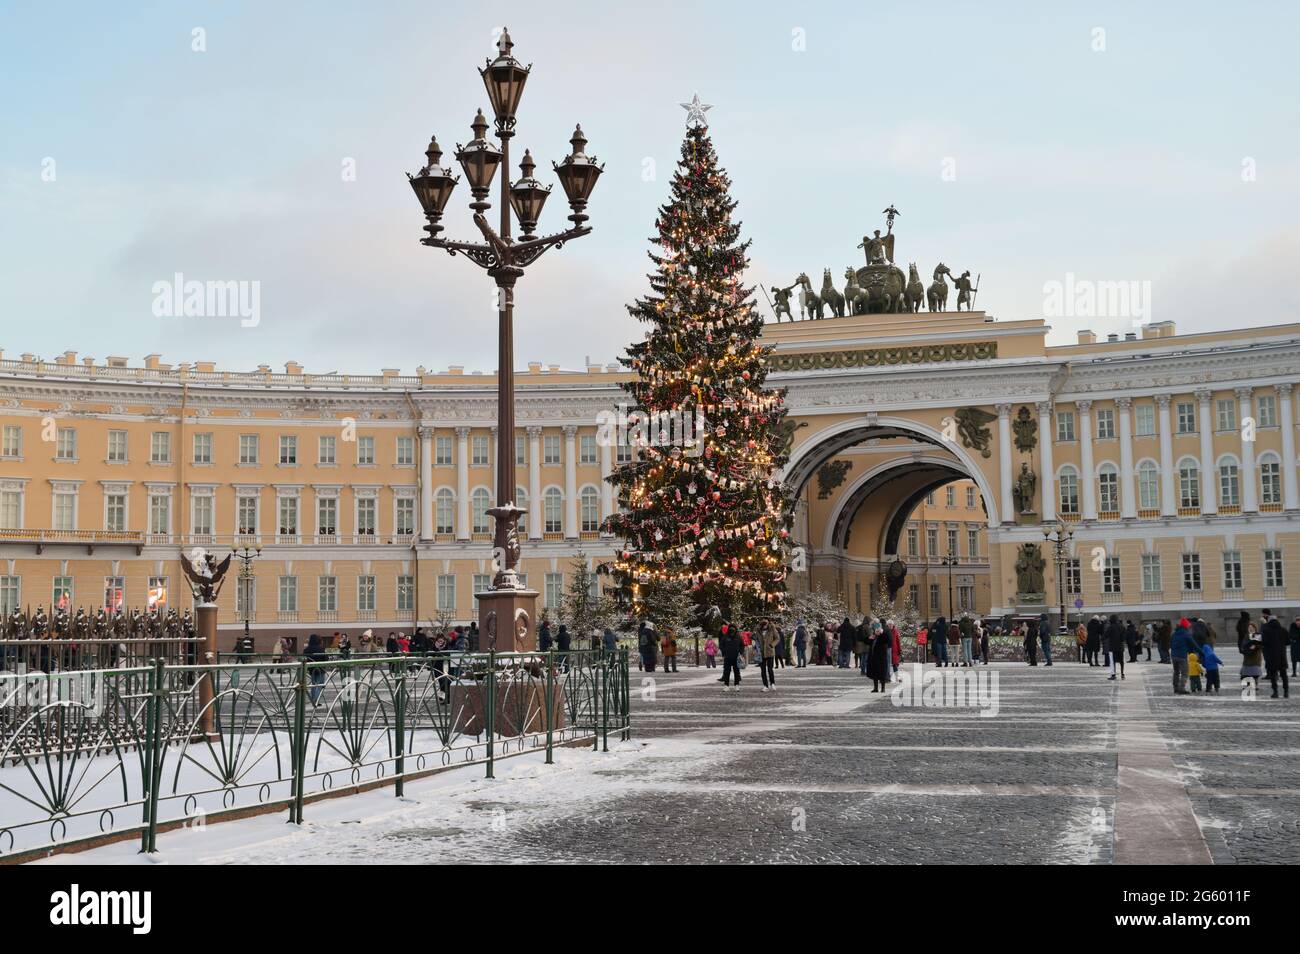 St. Petersburg, Russia, 16th January, 2021: People at the Christmas tree on Palace square against the arch of the General Staff building Stock Photo